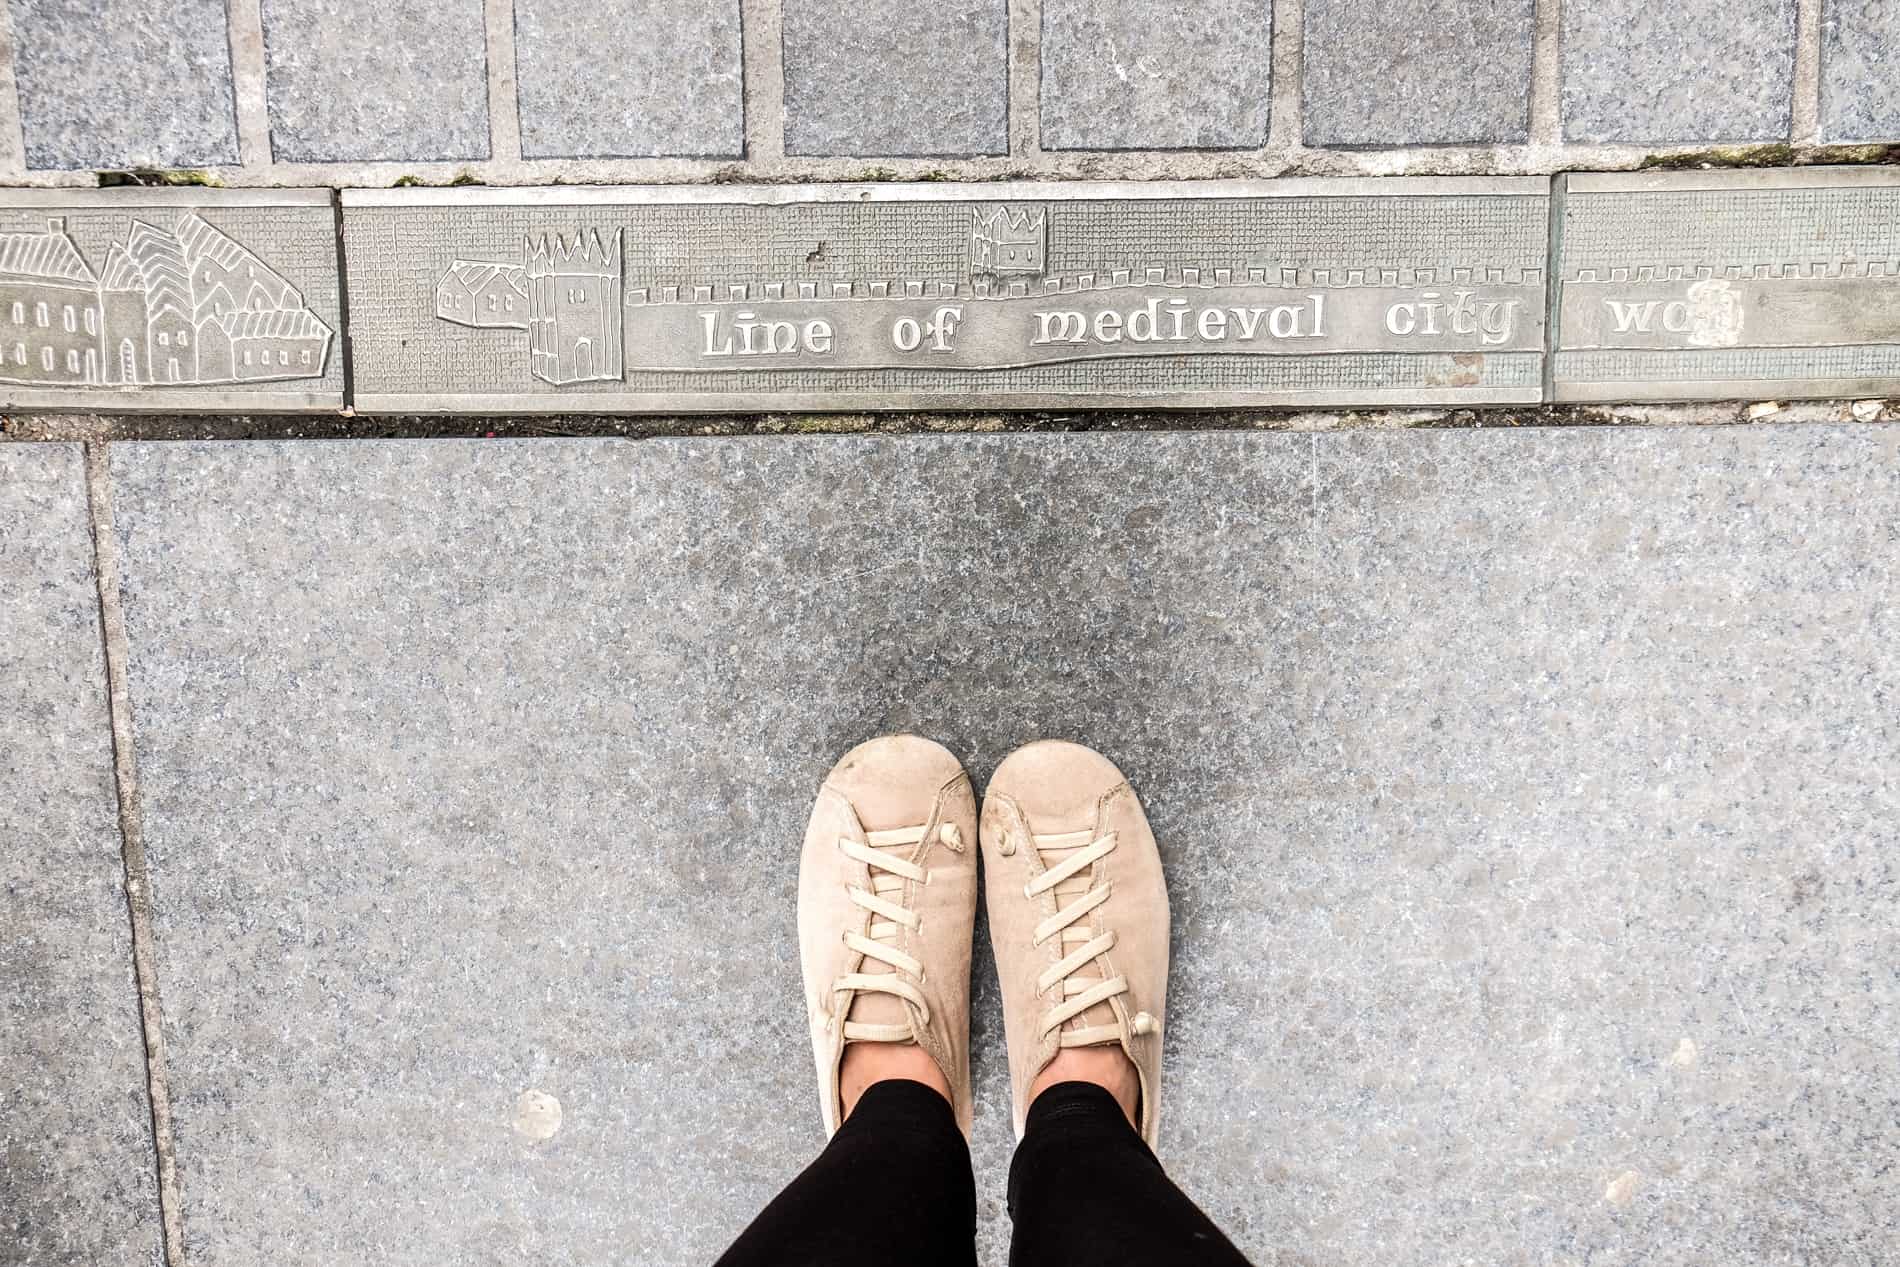 A carved metal marker on a pavement shows the Line of the Medieval City Wall of Waterford. 